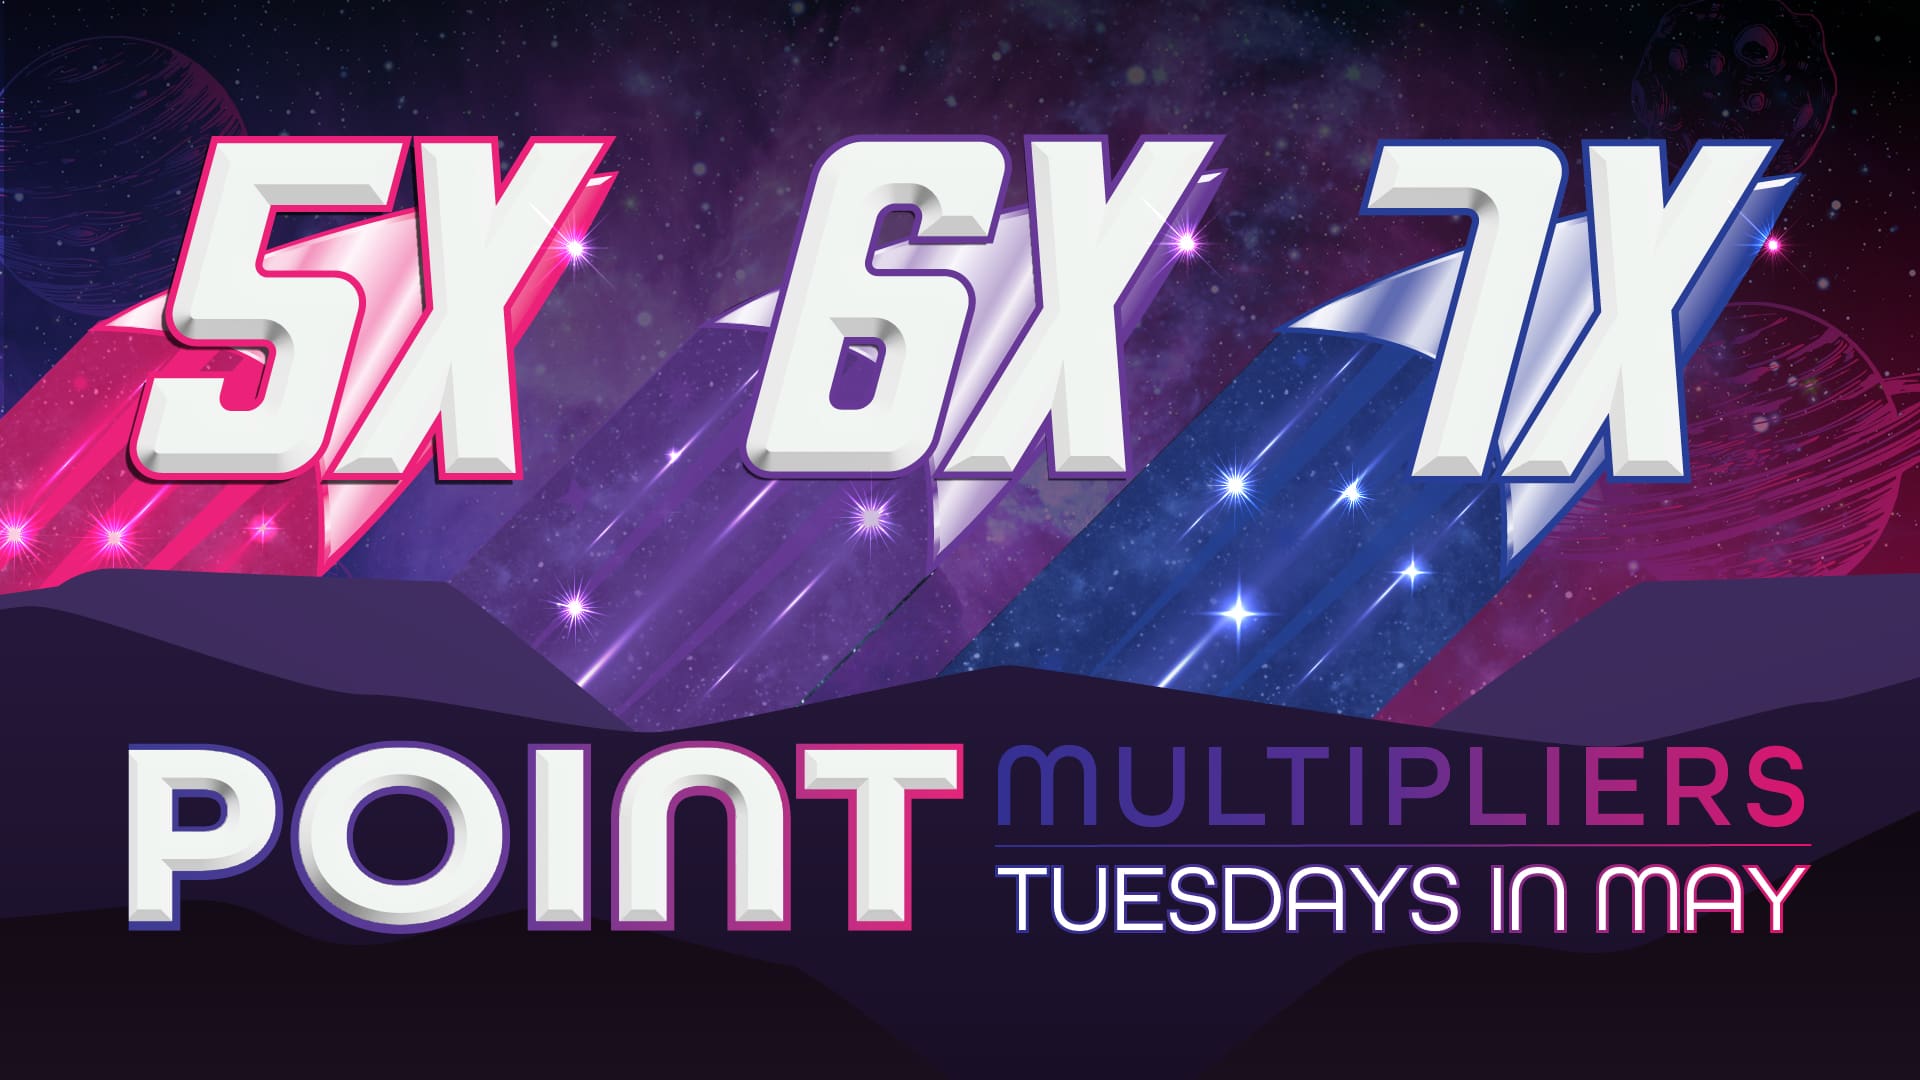 TUESDAY 5X 6X 7X POINT MULTIPLIERS IN MAY